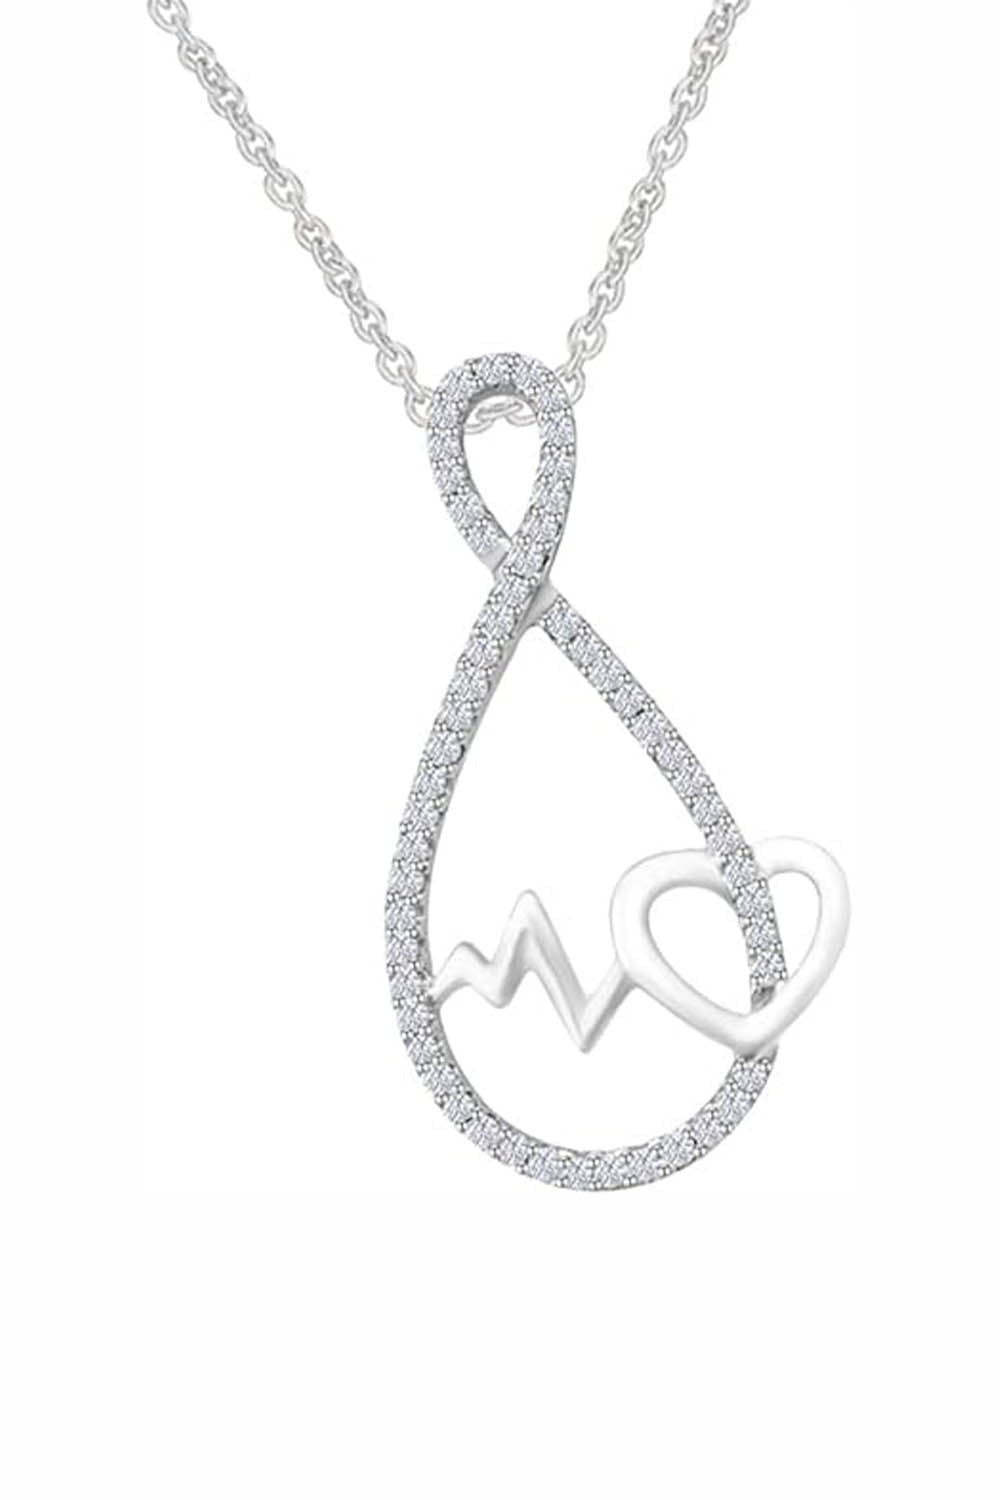 White Gold Color Yaathi Heartbeat Infinity Pendant Necklace